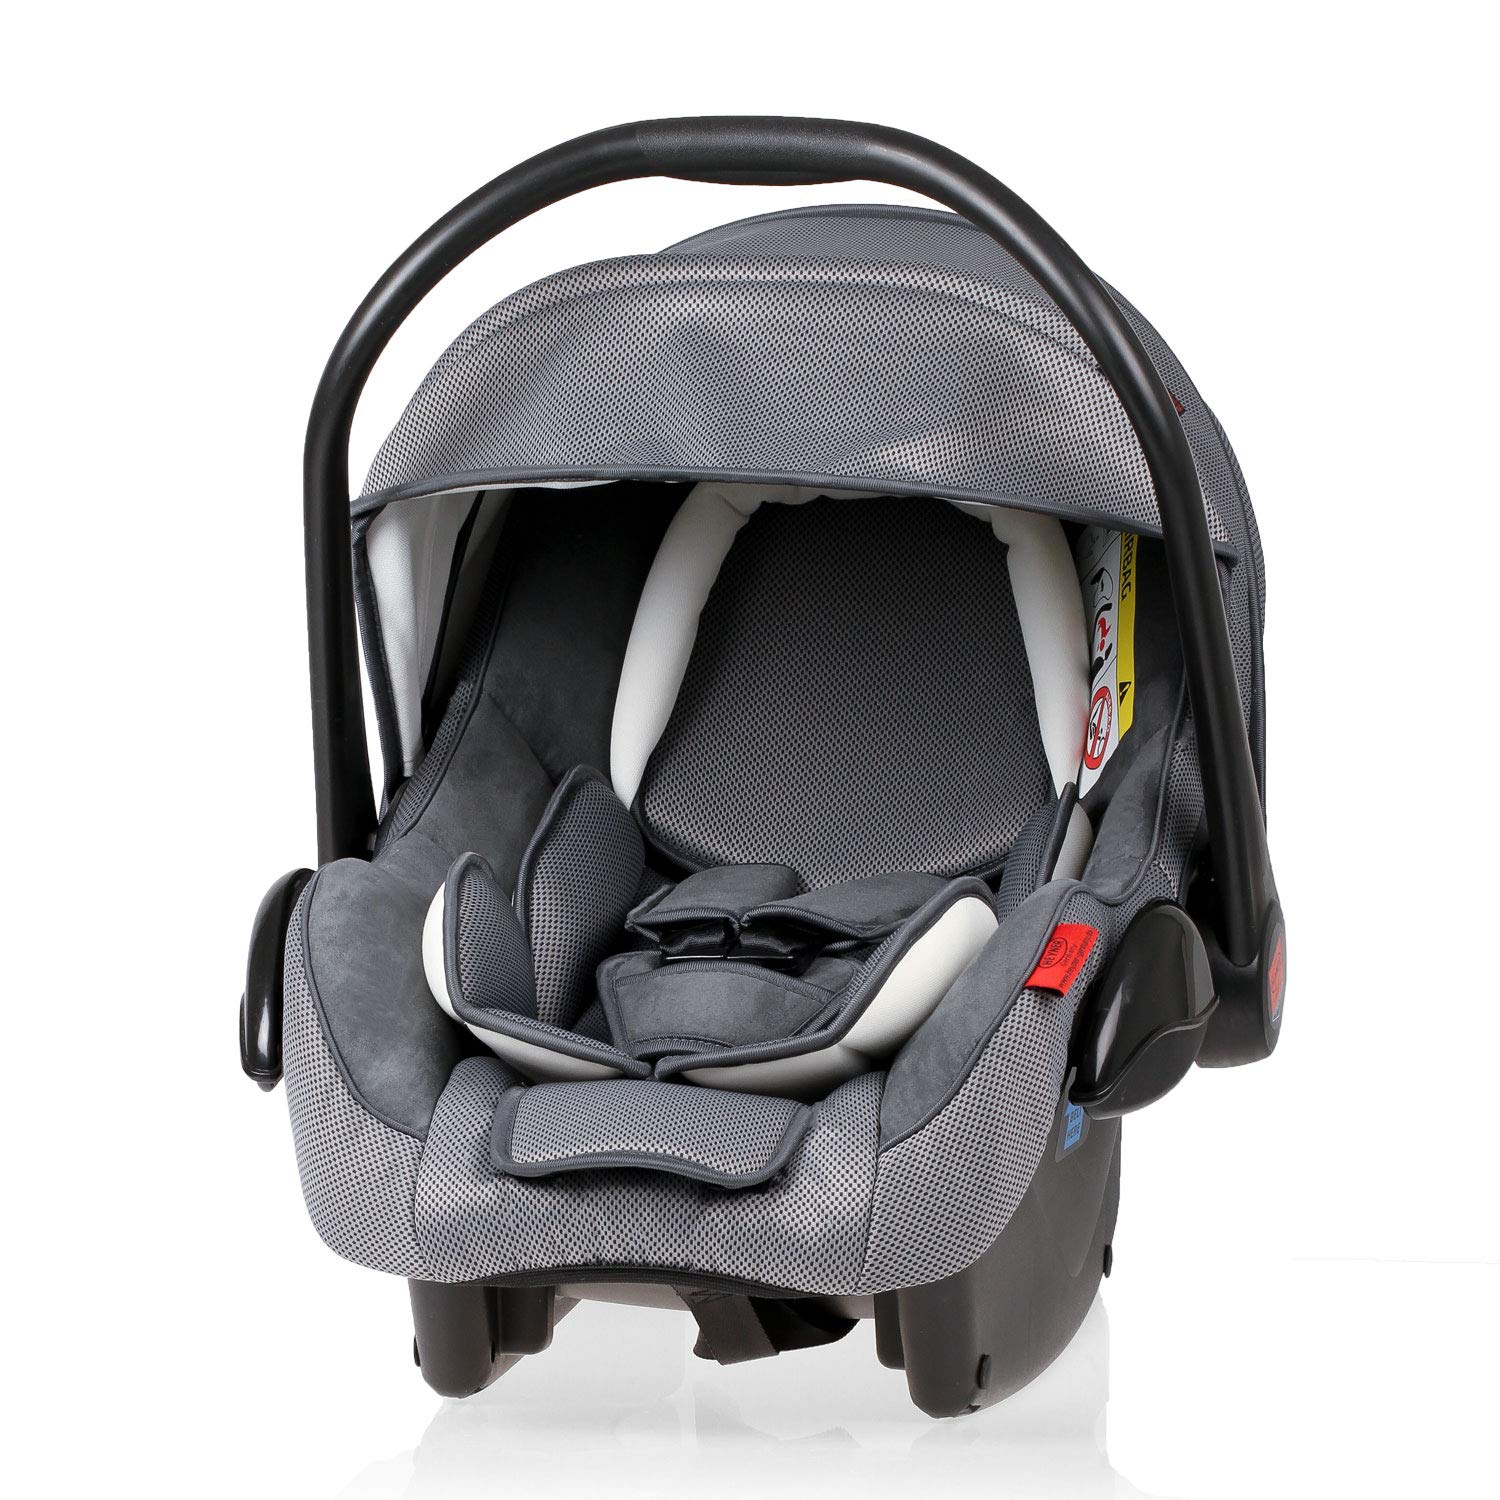 HEYNER® Reboarder Baby Car Seat Reverse Facing 0 to 13 kg Birth to 13 Months 40 cm to 95 cm (Grey)